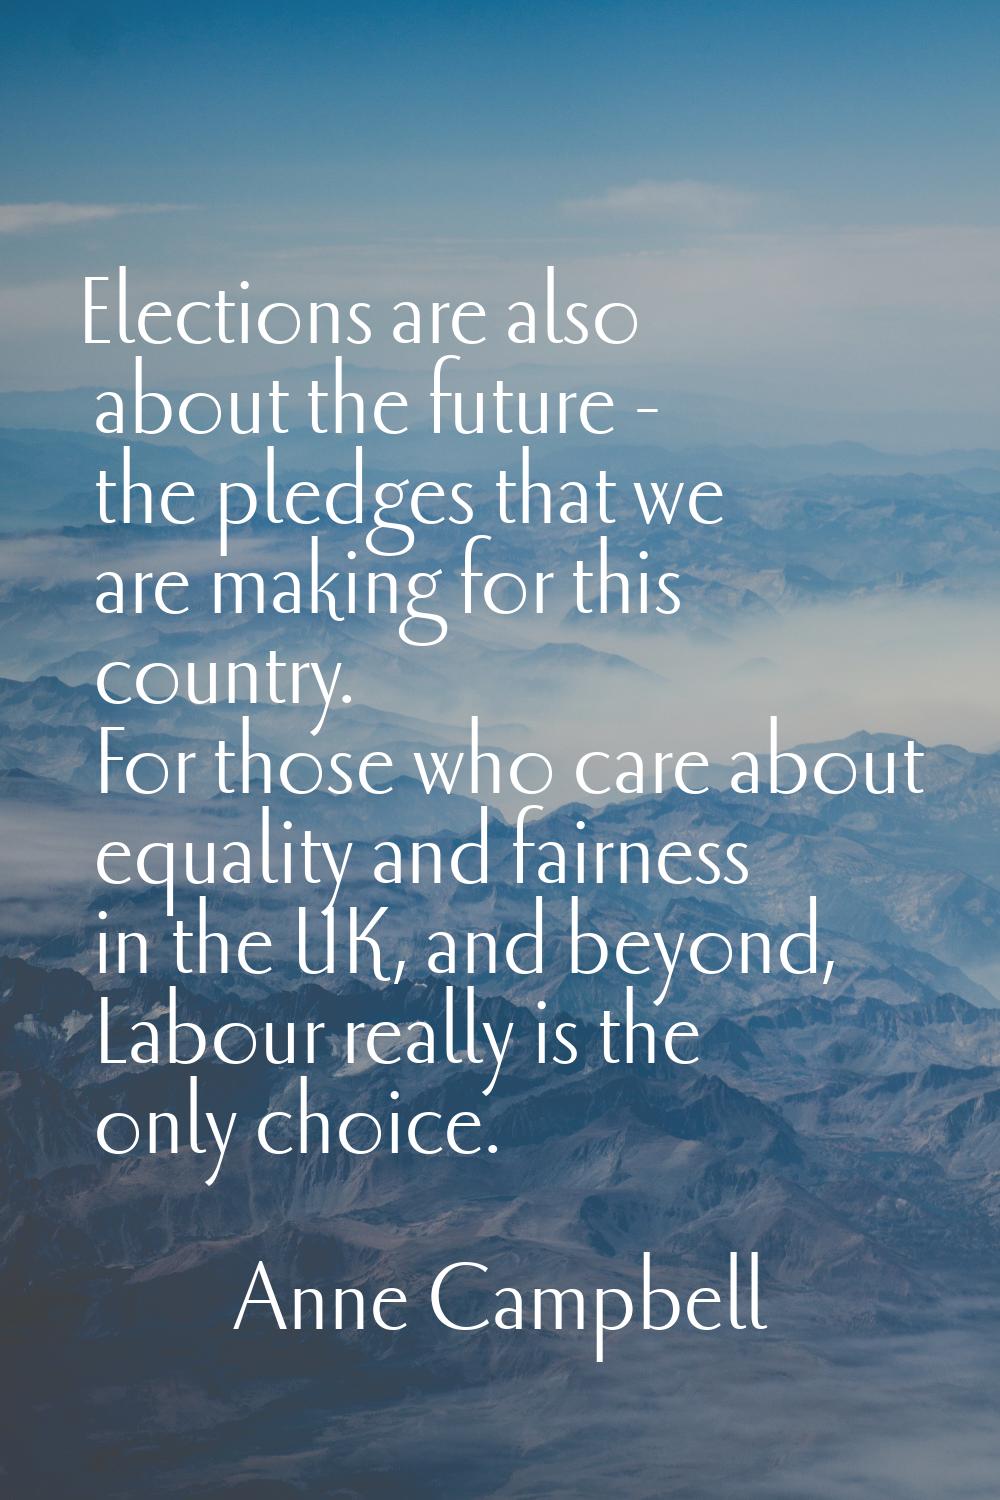 Elections are also about the future - the pledges that we are making for this country. For those wh